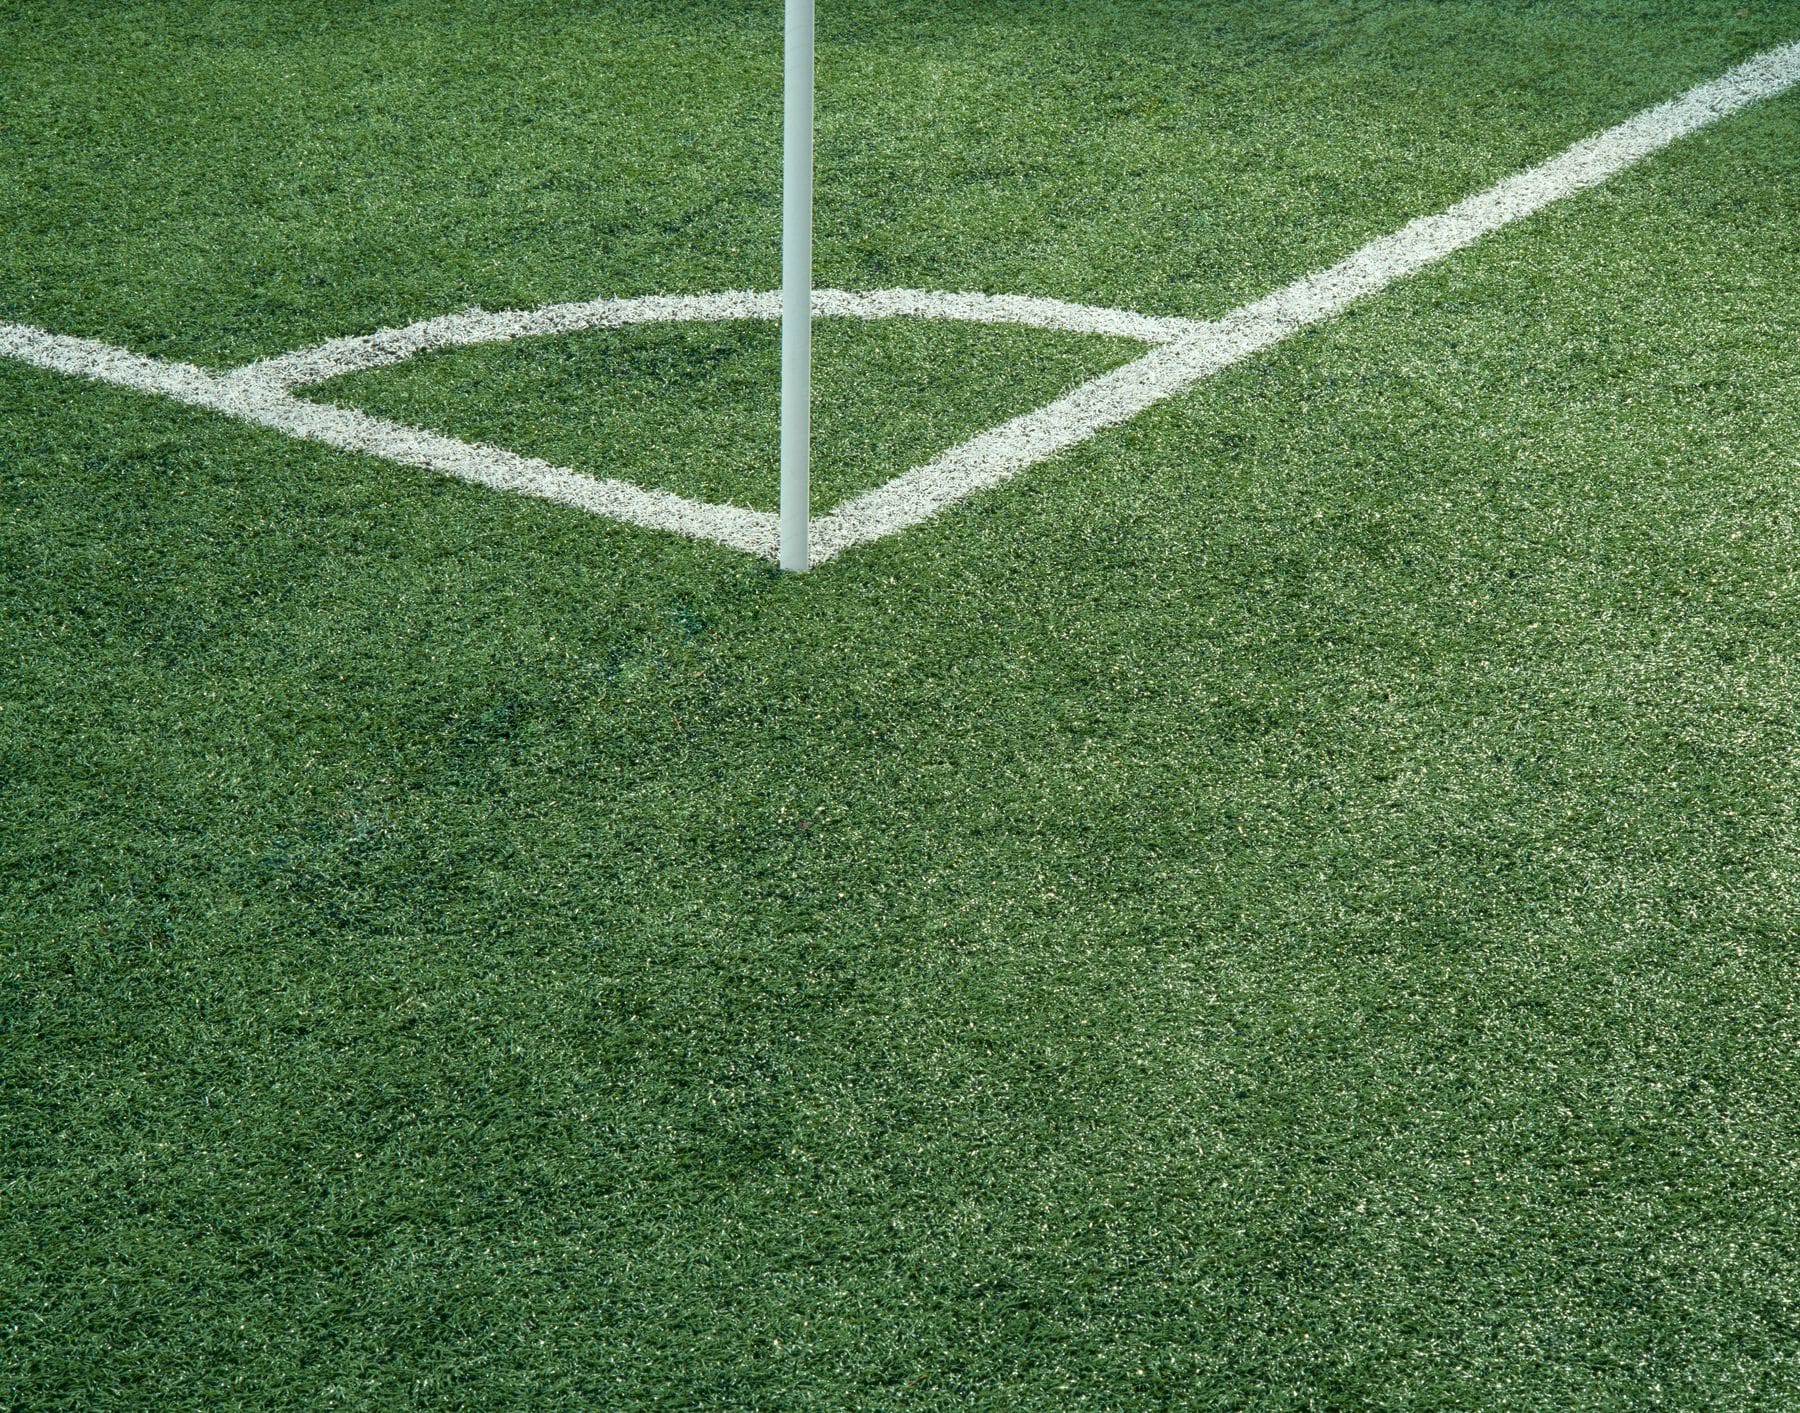 A corner of a soccer field with green grass and white lines